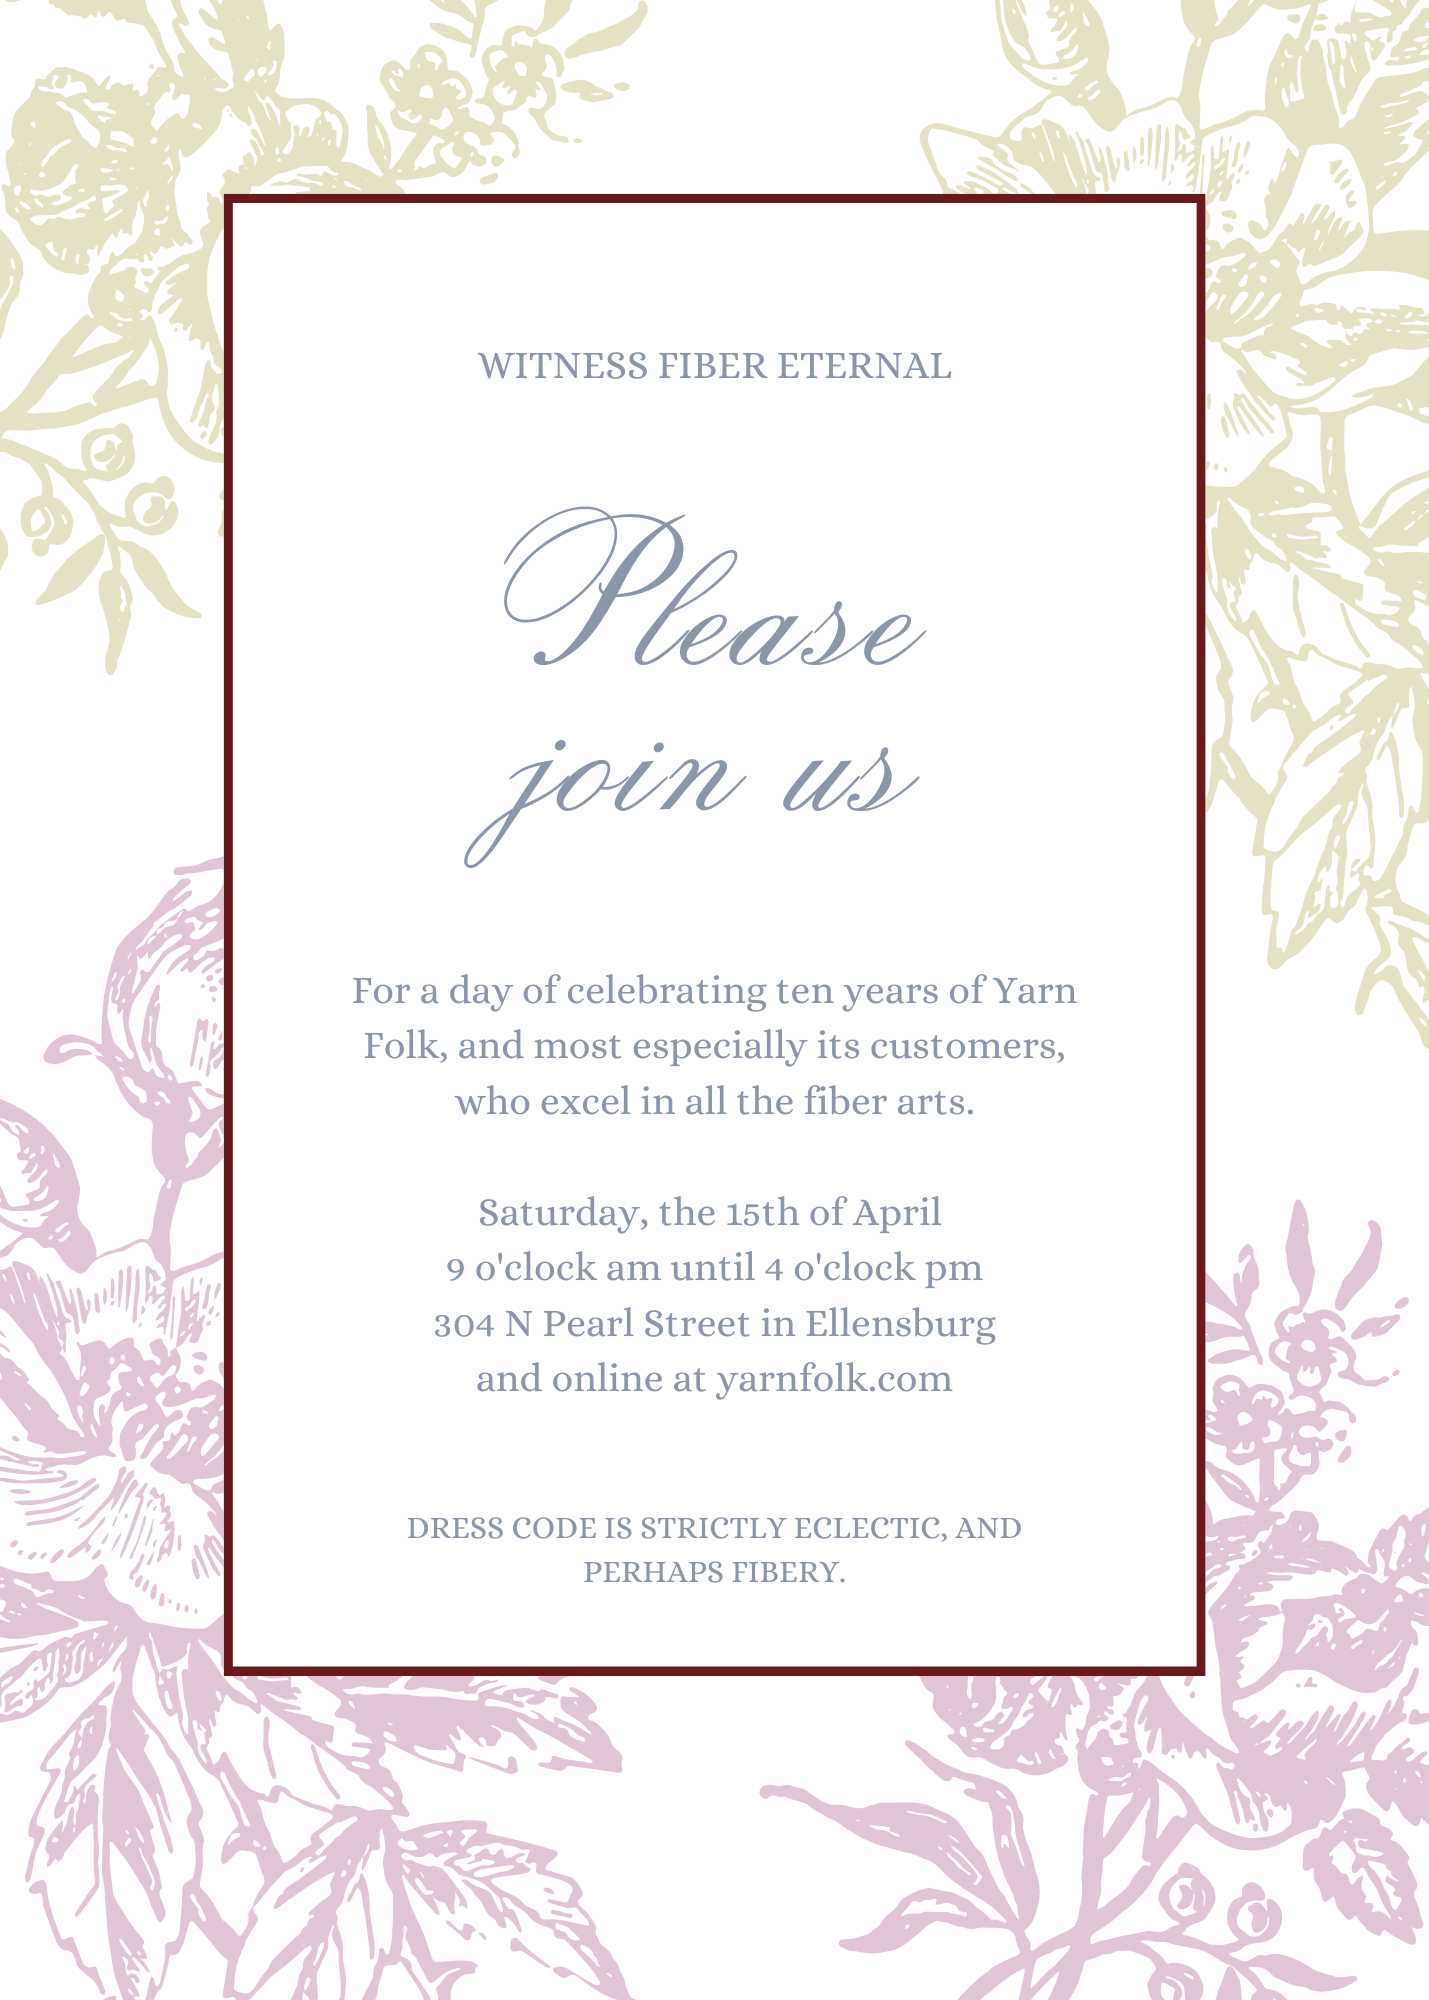 You're invited! -- 10th Anniversary Party THIS Saturday, April 15th Yarn Folk